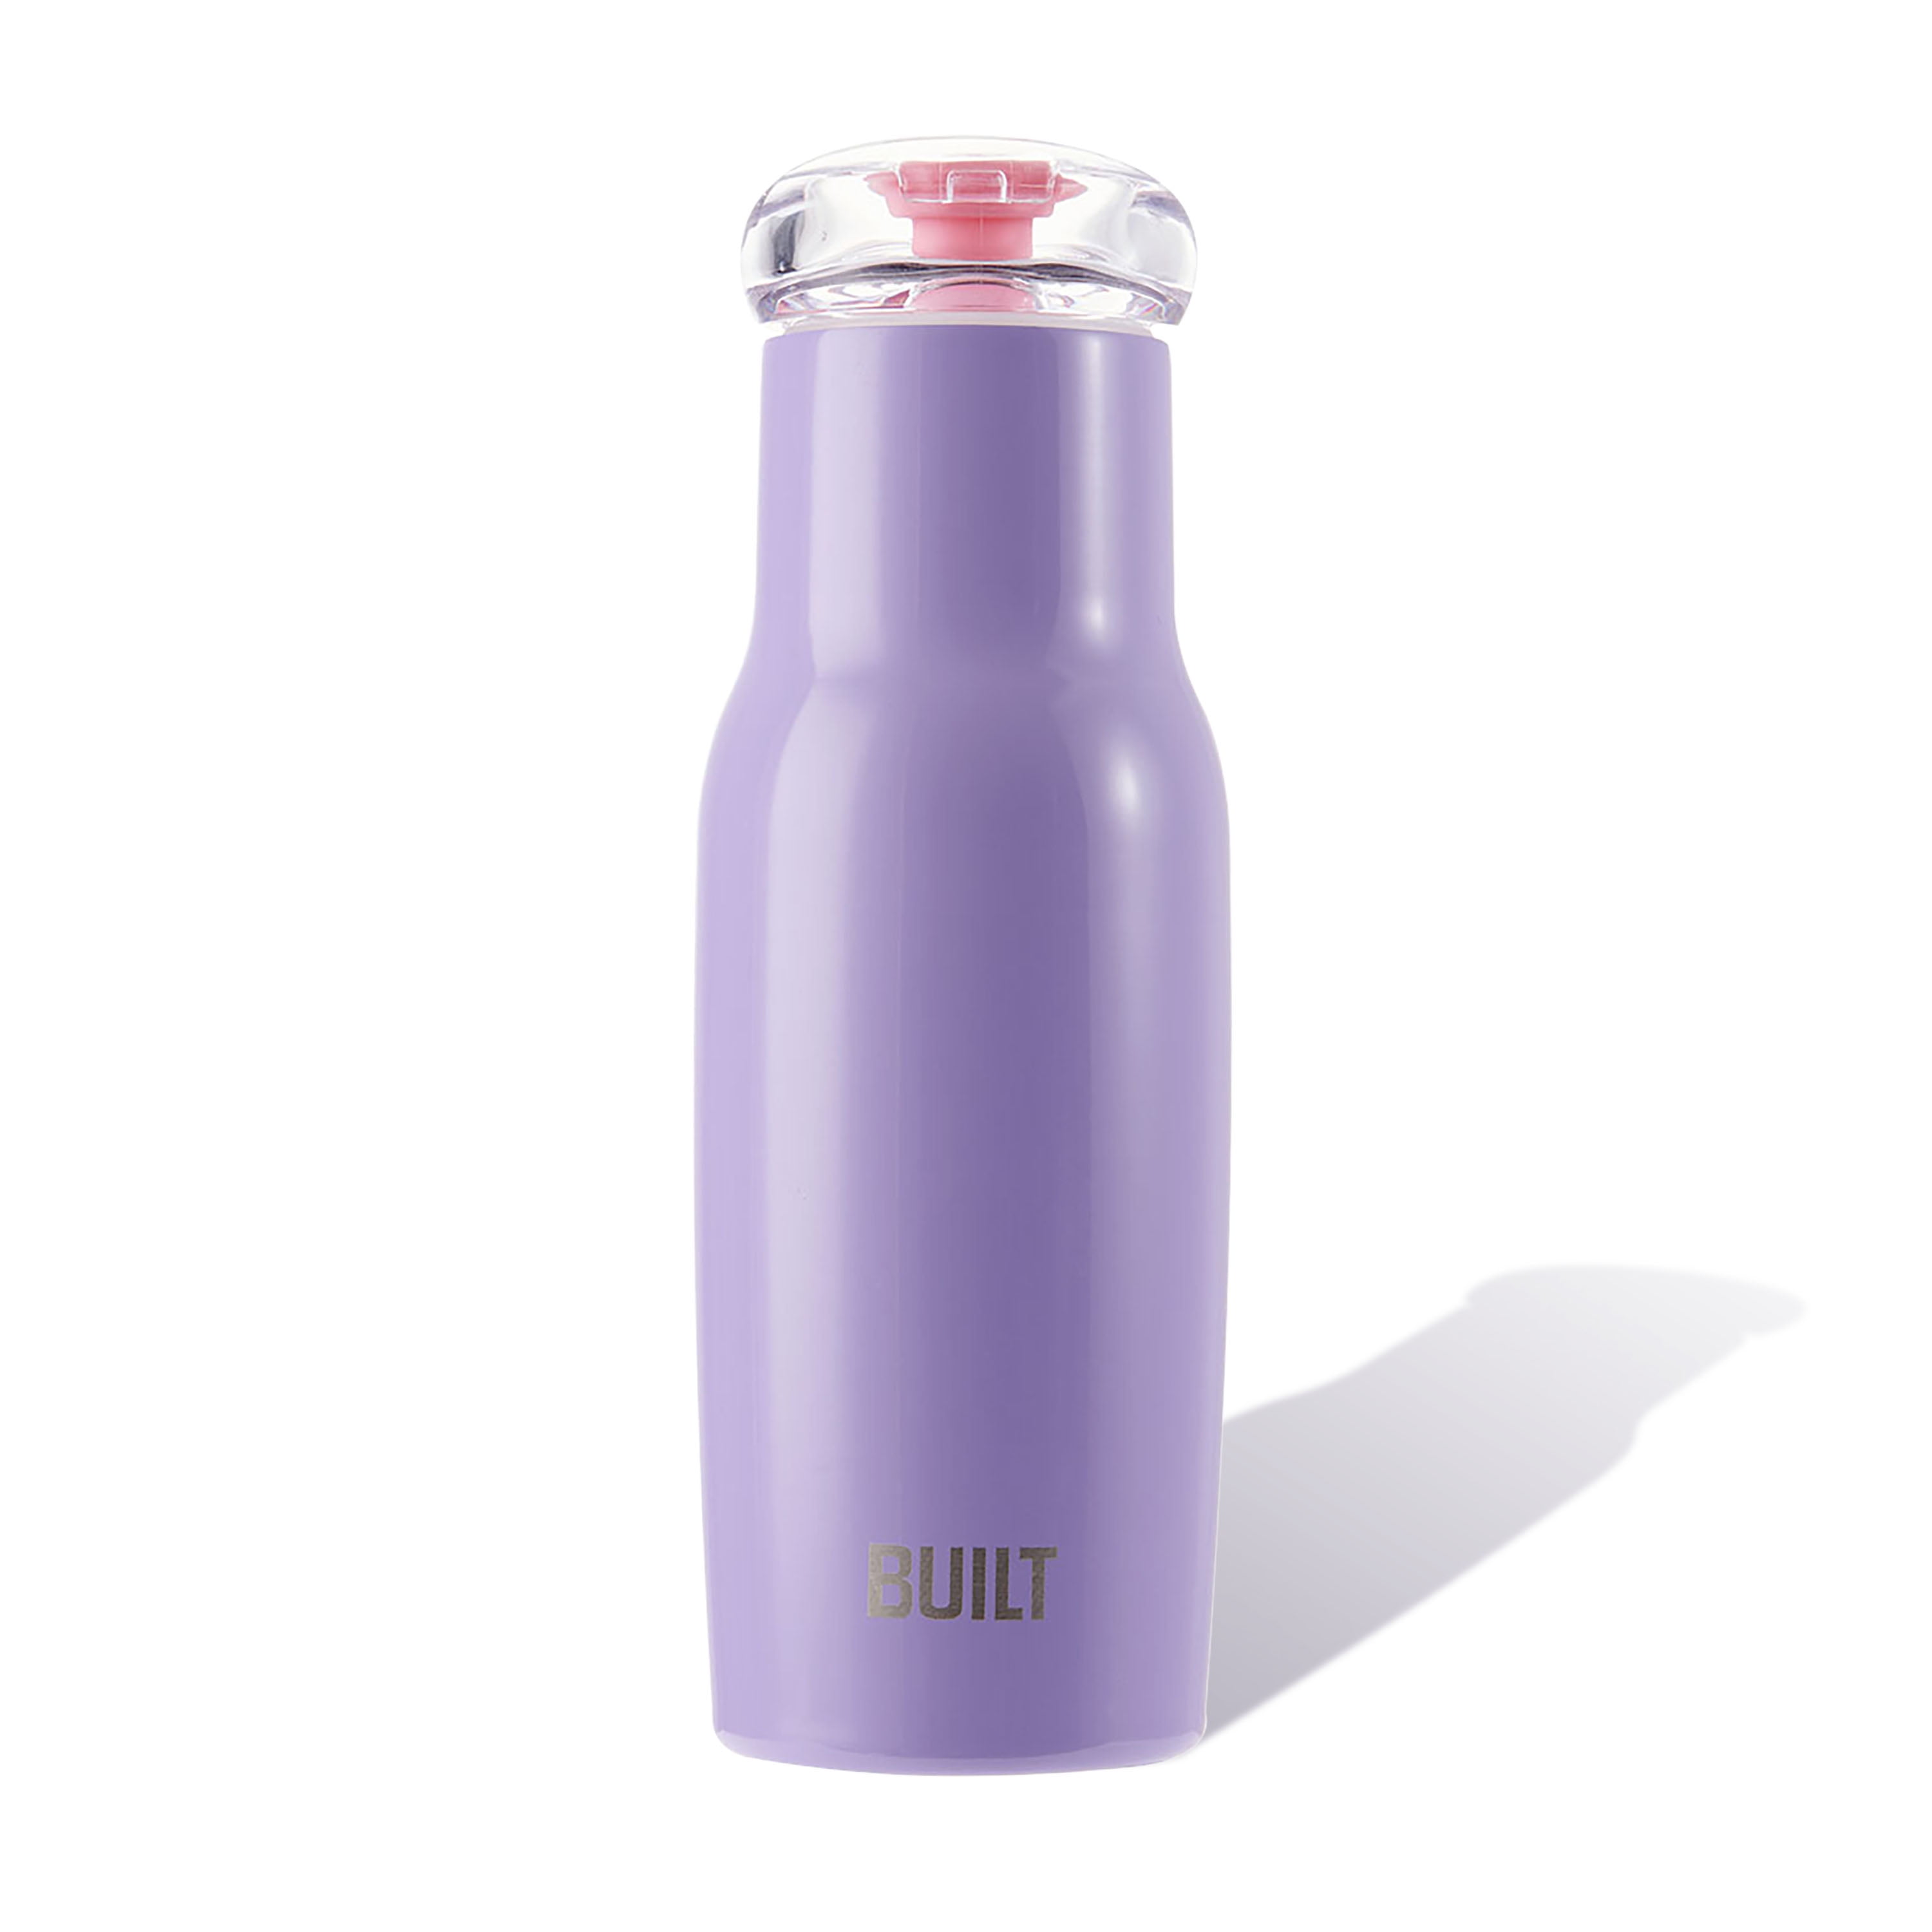 Small Plastic Water Bottles with Flip-Up Straws, 13 oz. $8.87 FREE